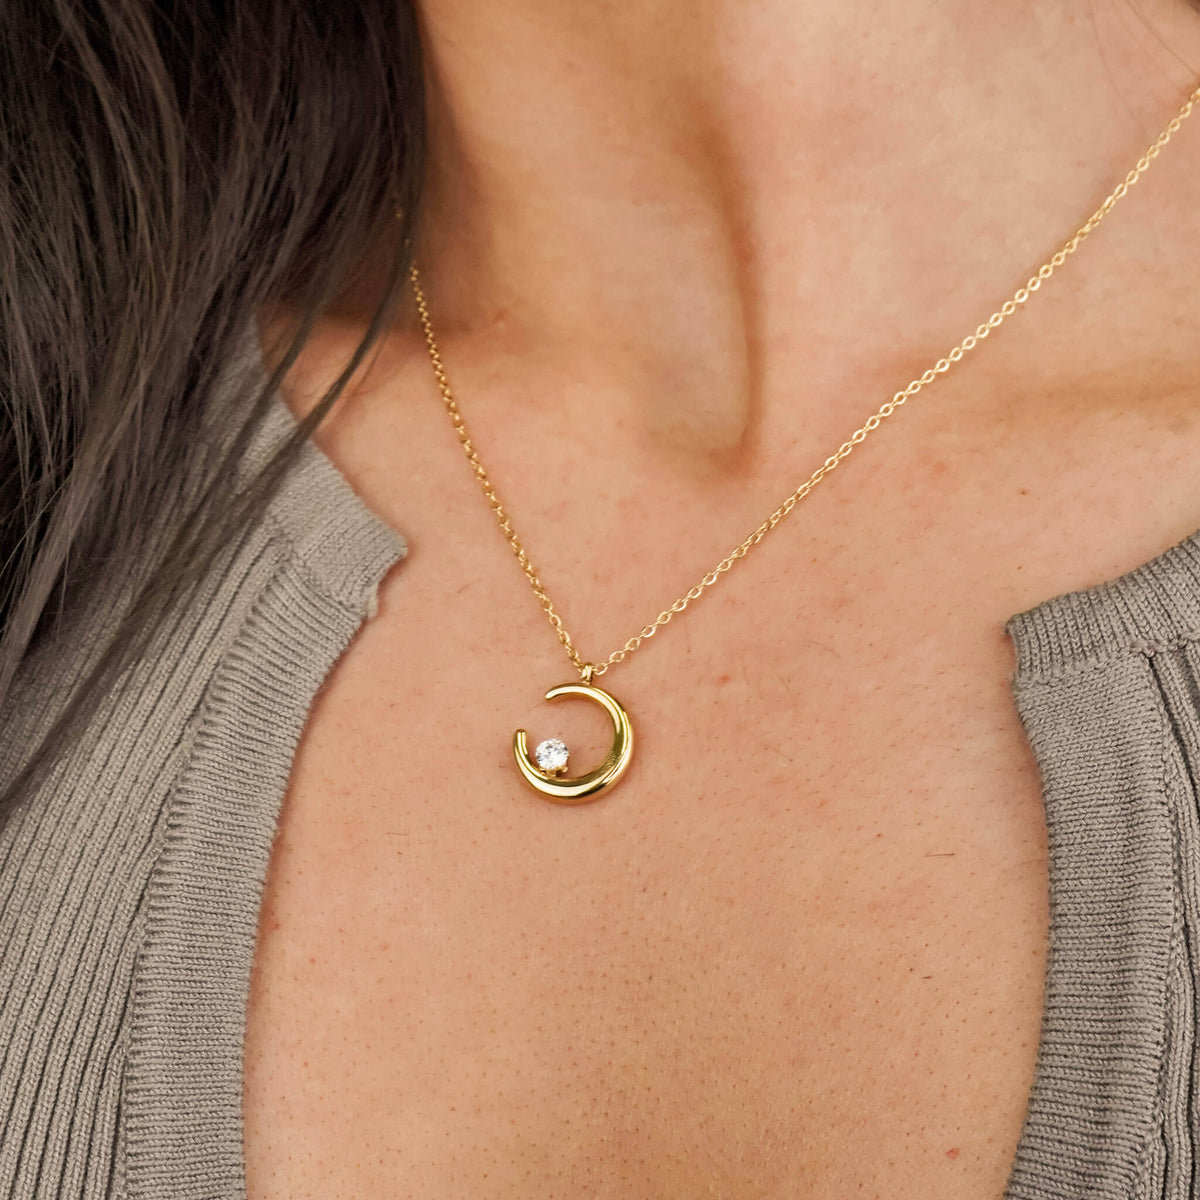 gift ideas for her: the crescent moon necklace from Mettle & Bloom is a perfect gift idea for her. The crescent shaped pendant hangs on a dainty chain and the focal point is the white zirconia stone that sits on the crescent moon. 